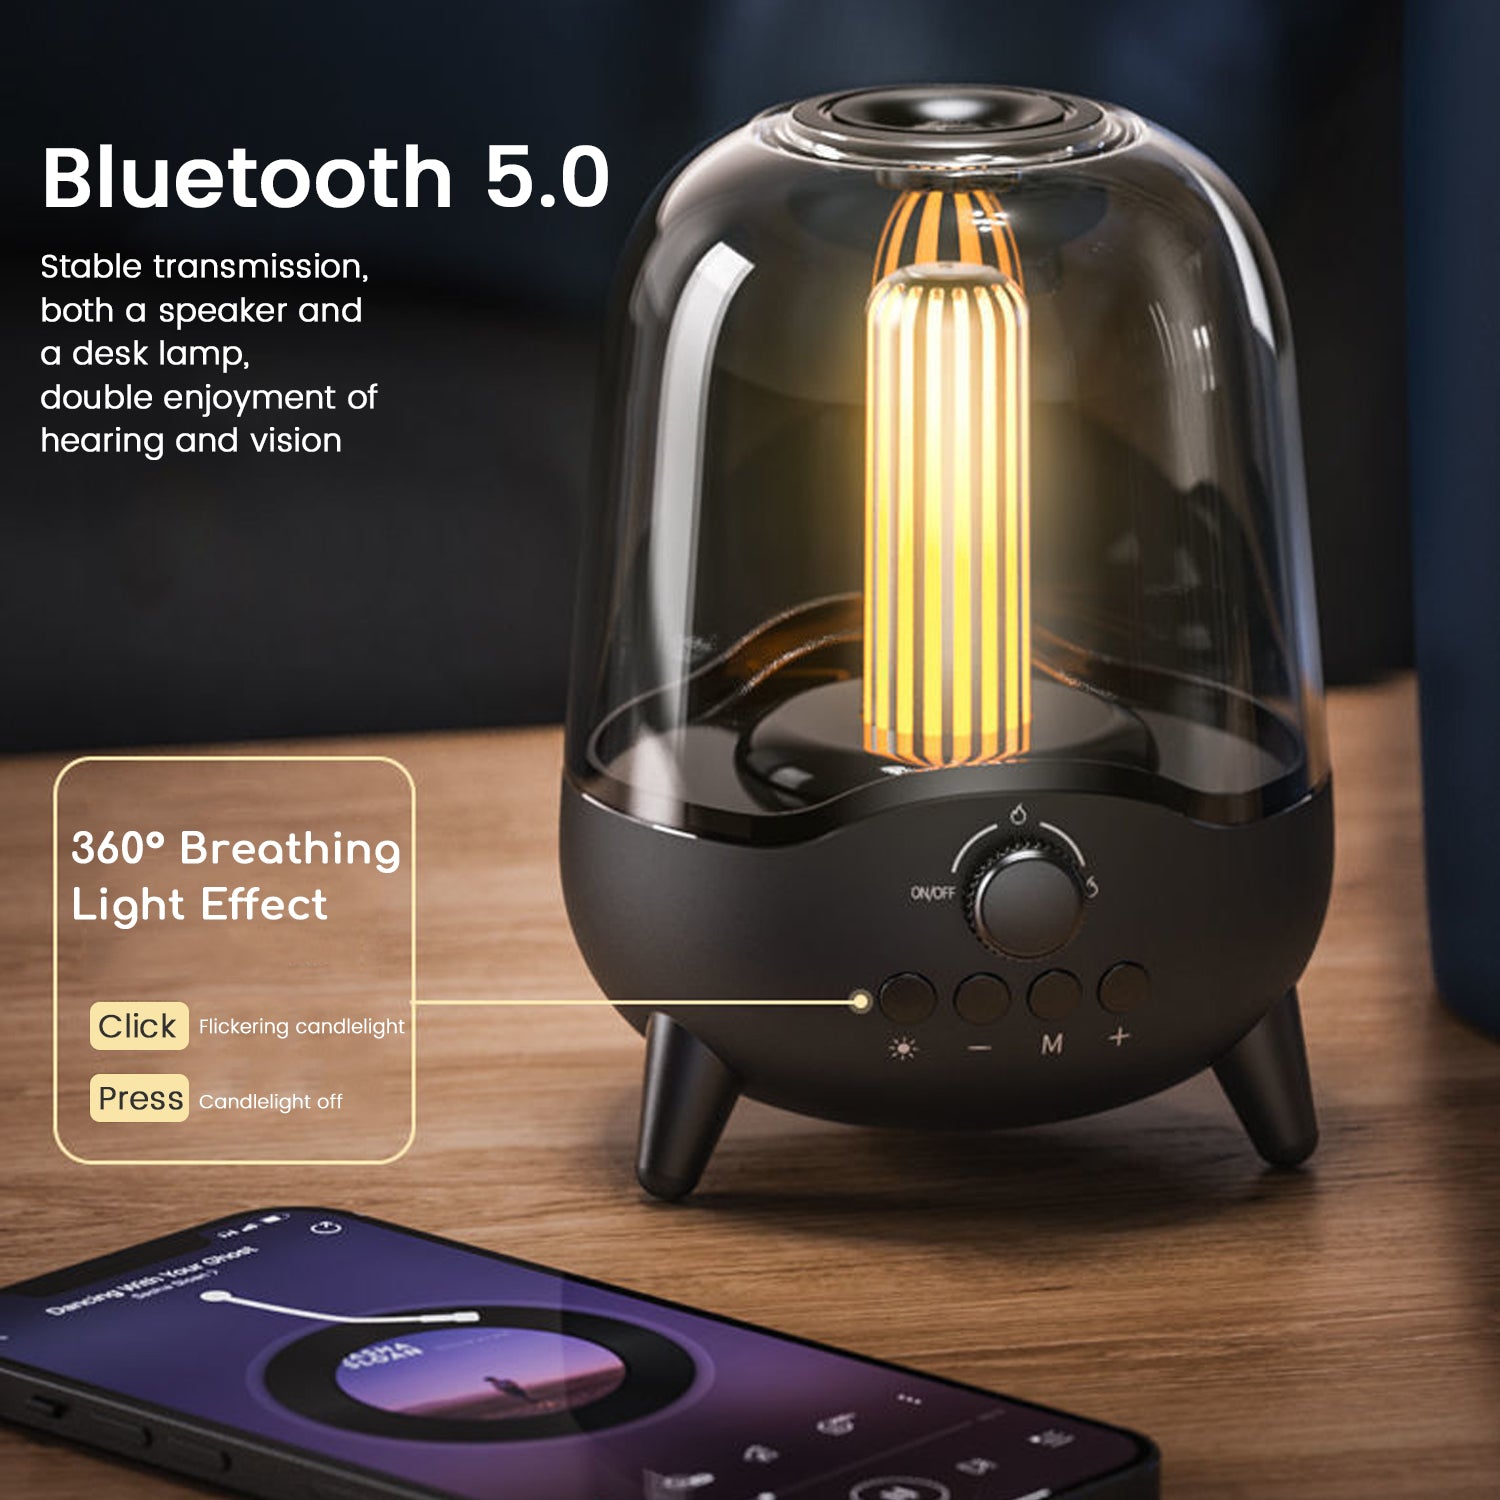 Portable Wireless Bluetooth 5.0 Speaker with Flickering Ambient Light